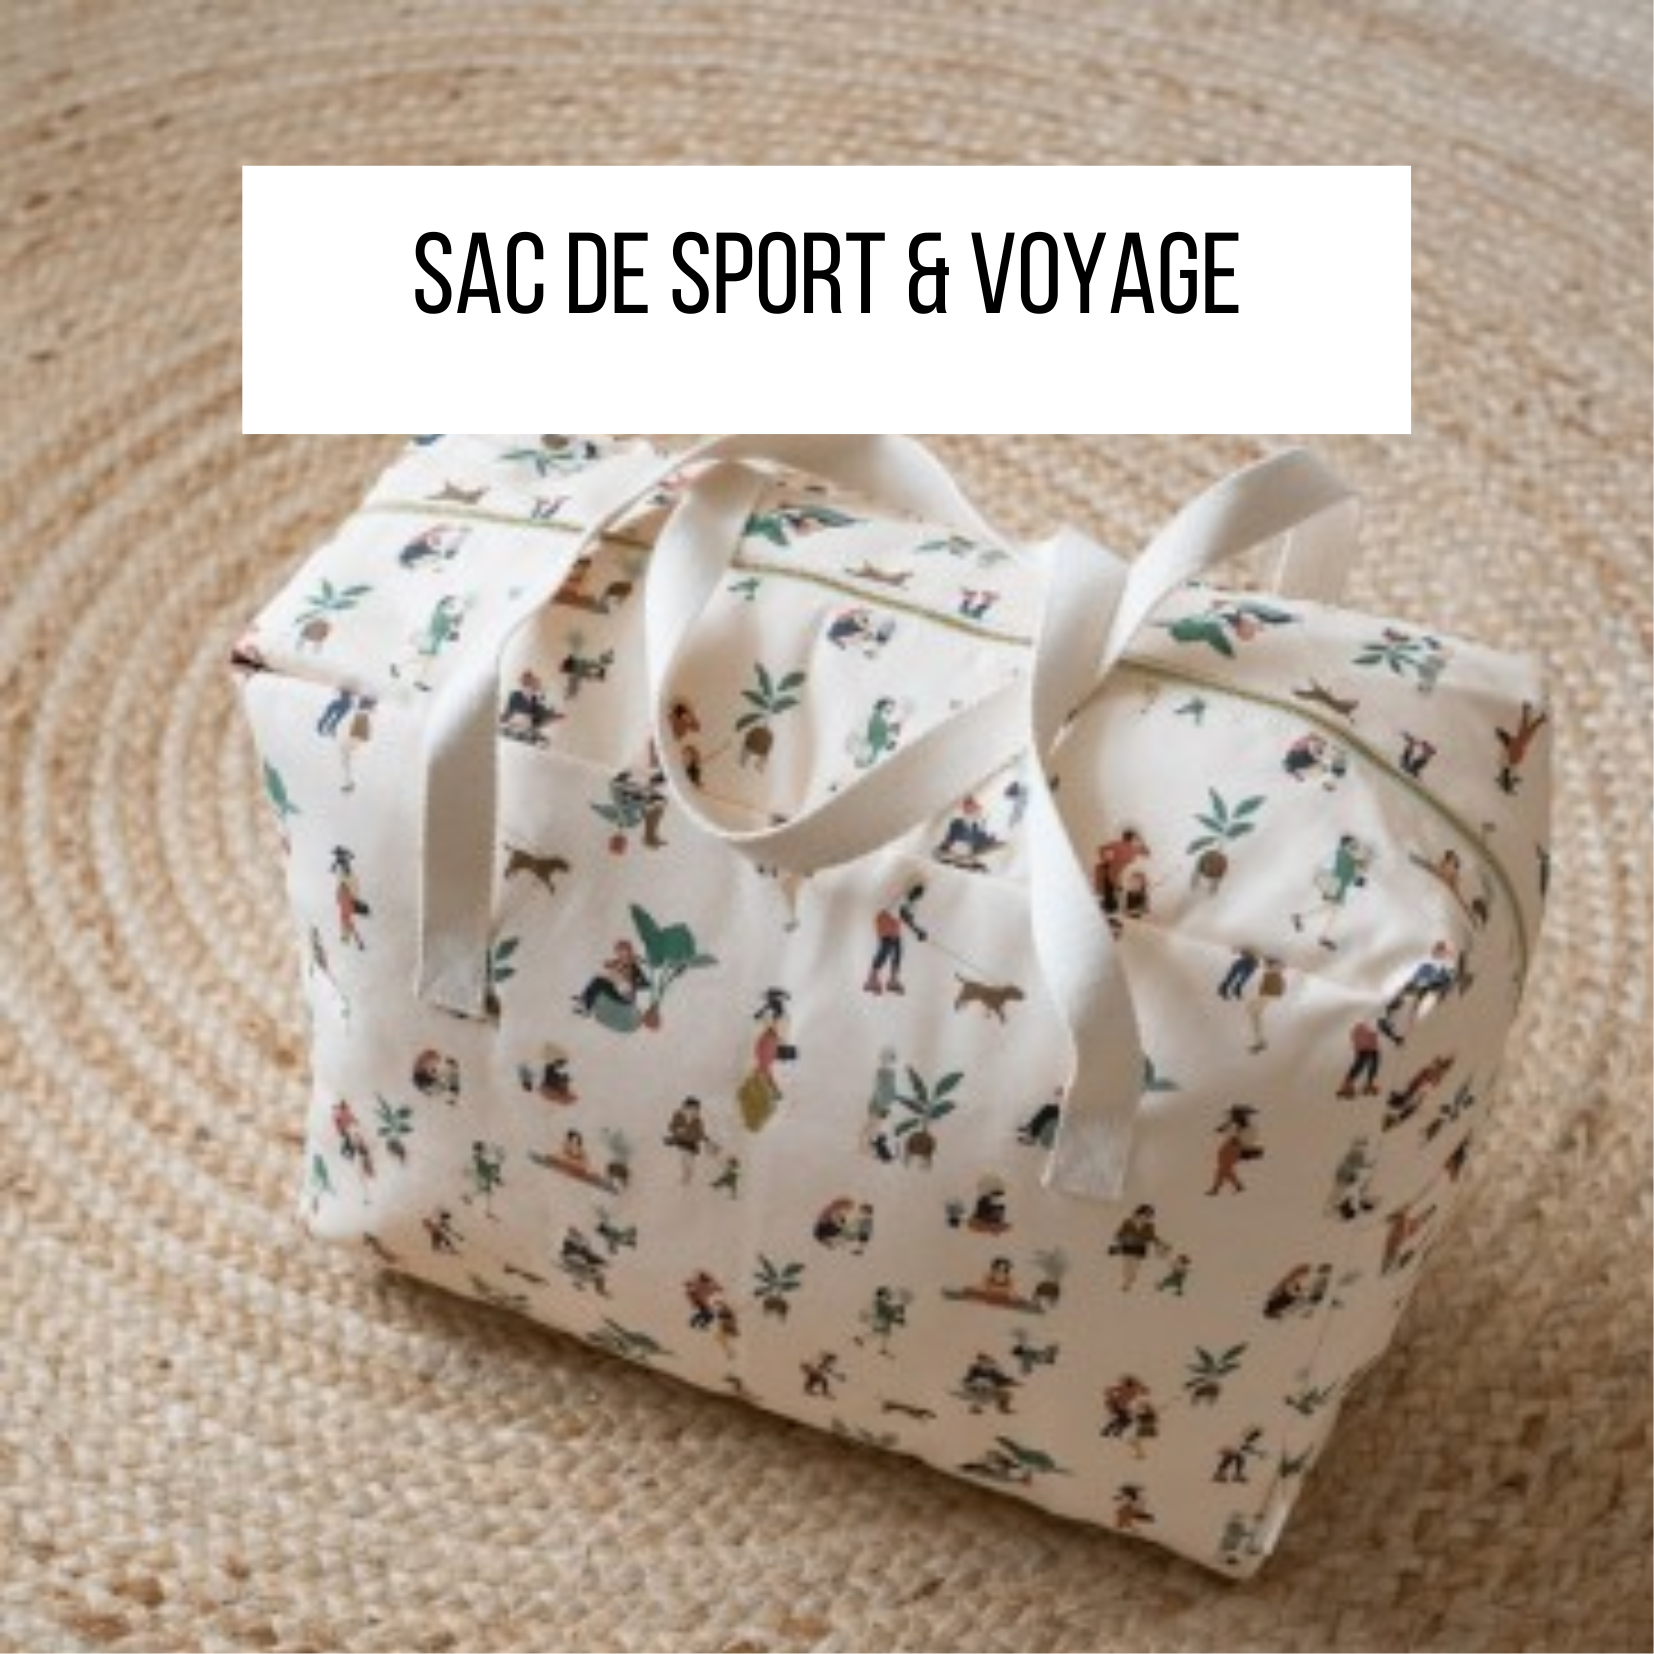 sac weekend vacance polochon voyage sport famille